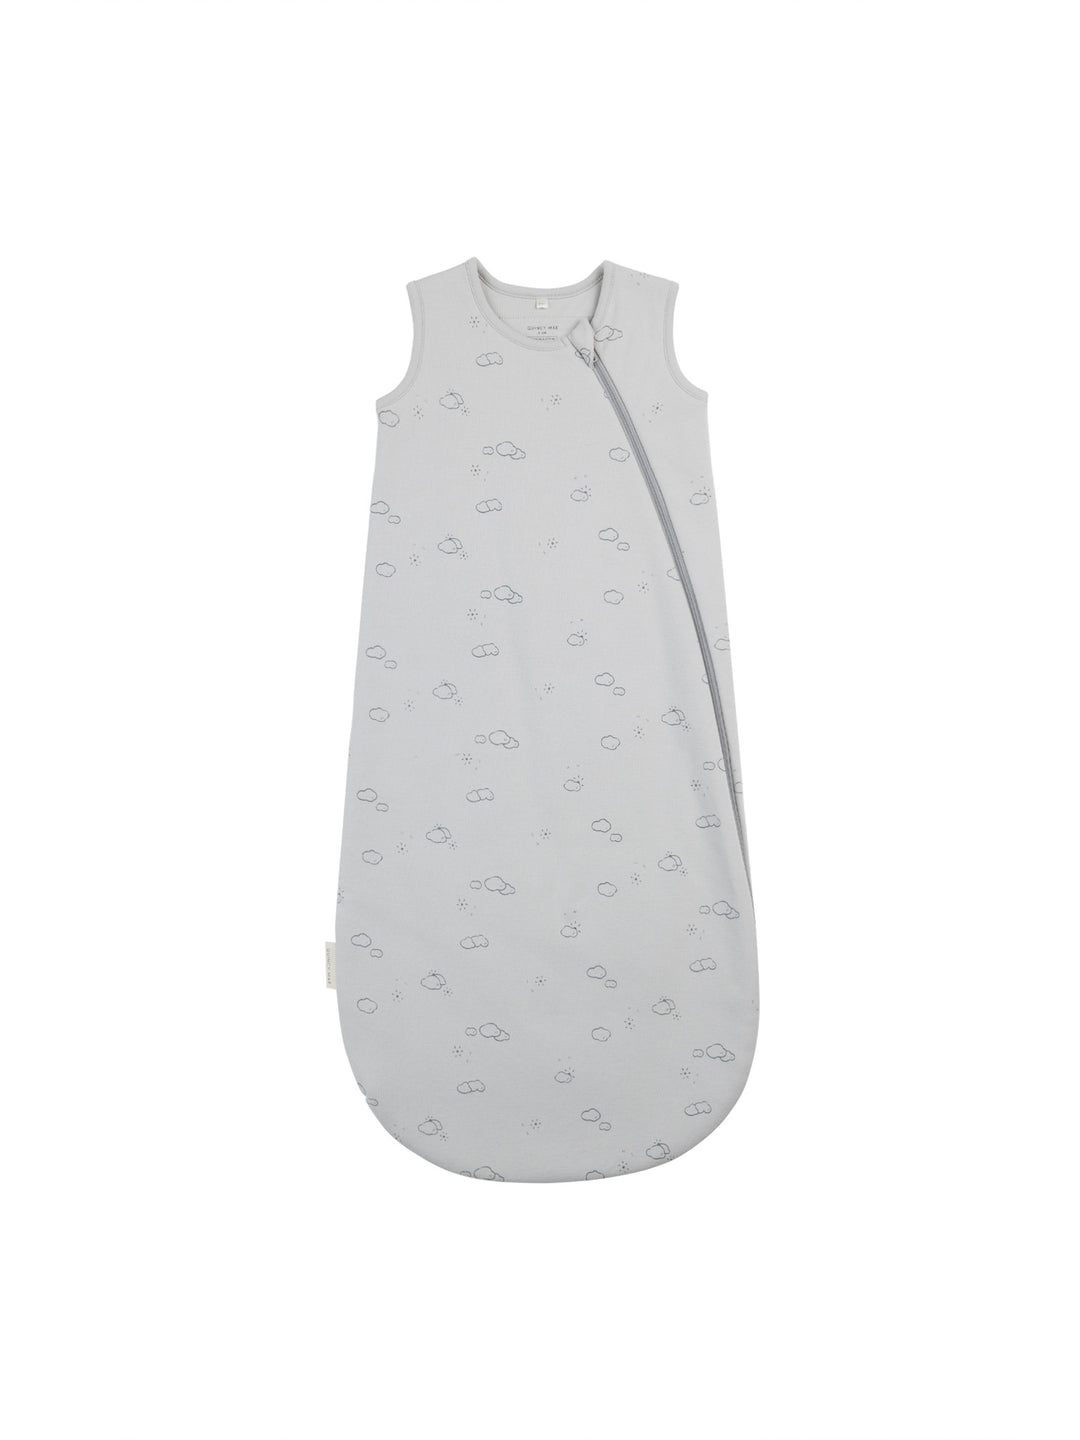 Quincy Mae – Jersey Sleep Bag in Sunny Day